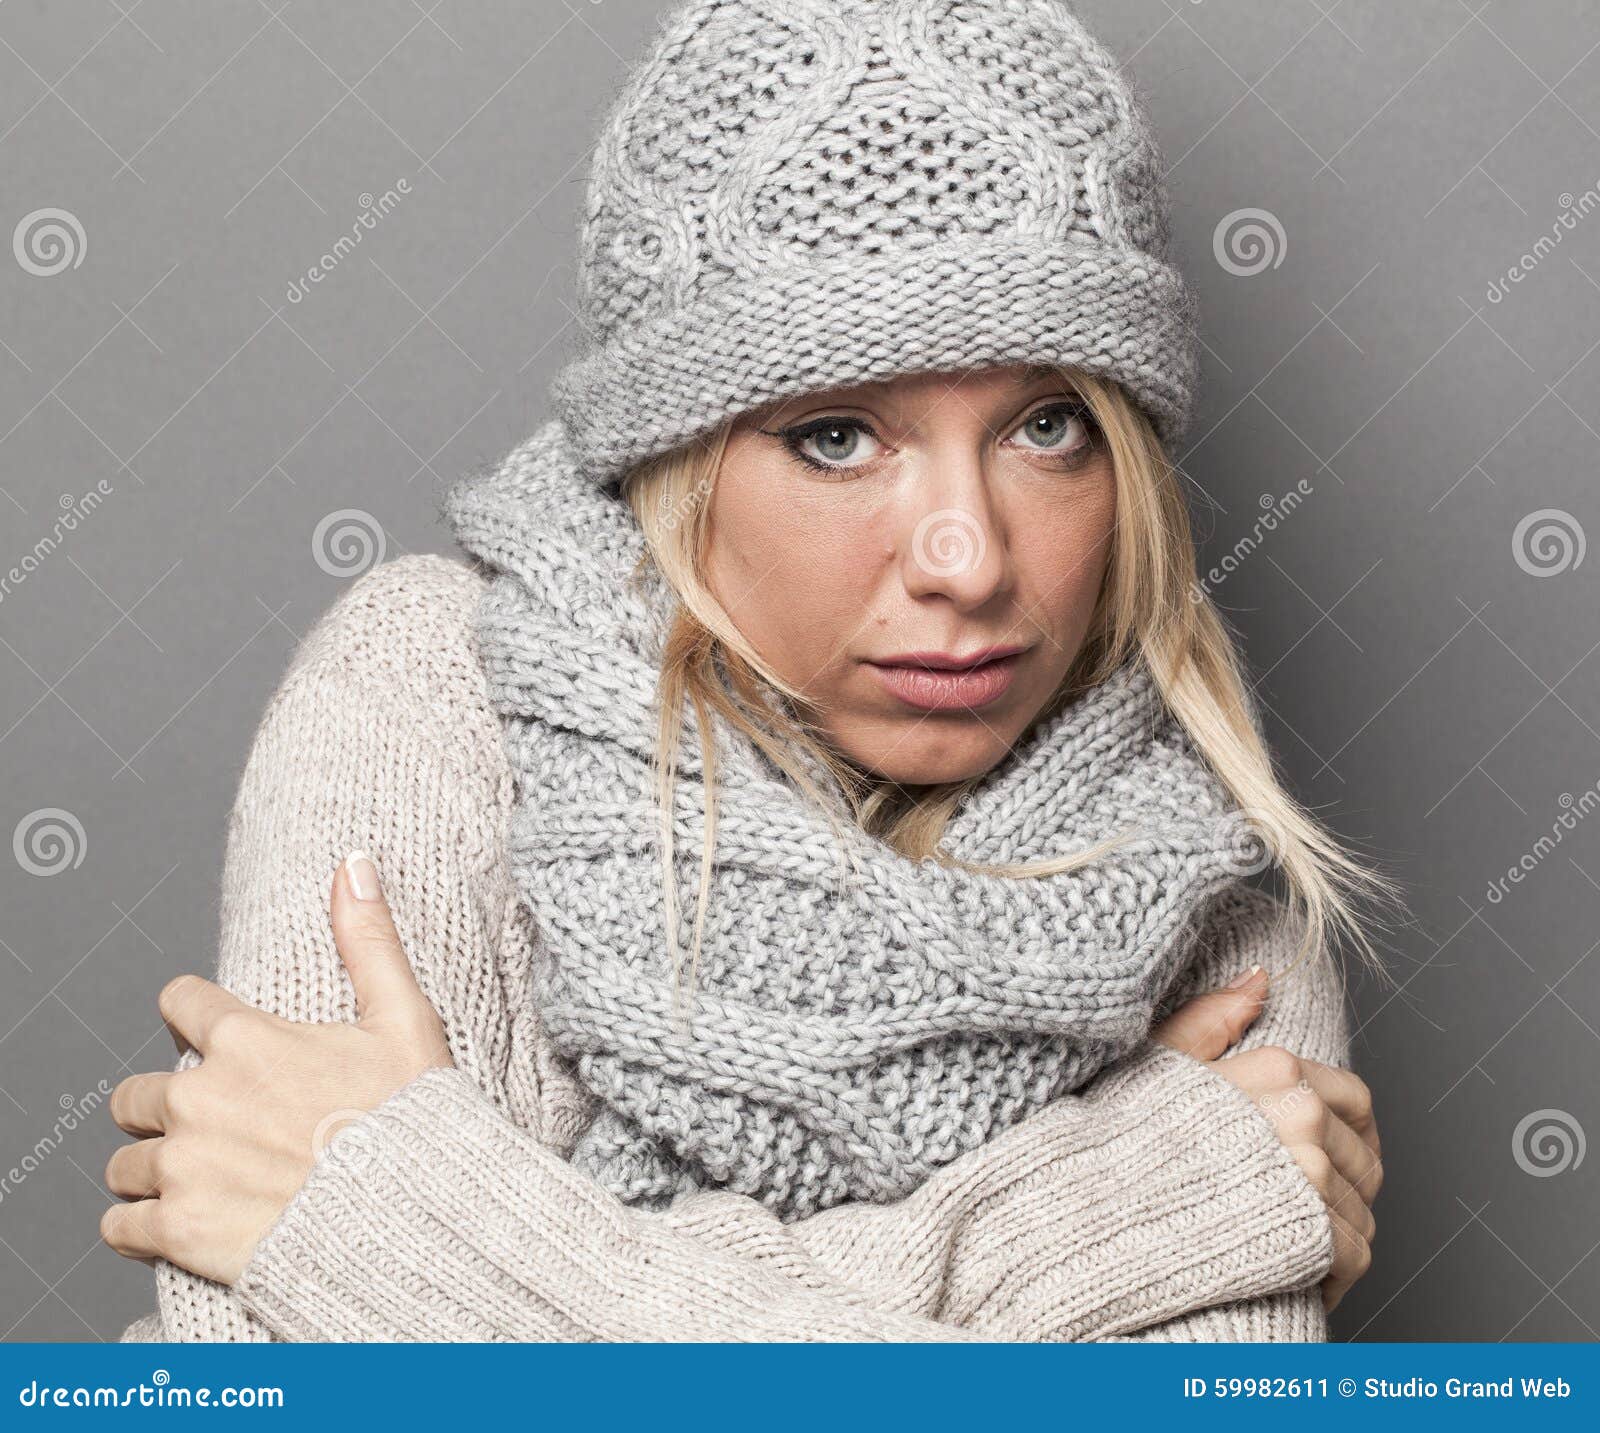 Sad Girl Staying Warm in Wrapped Up Cozy Winter Scarf Stock Image ...